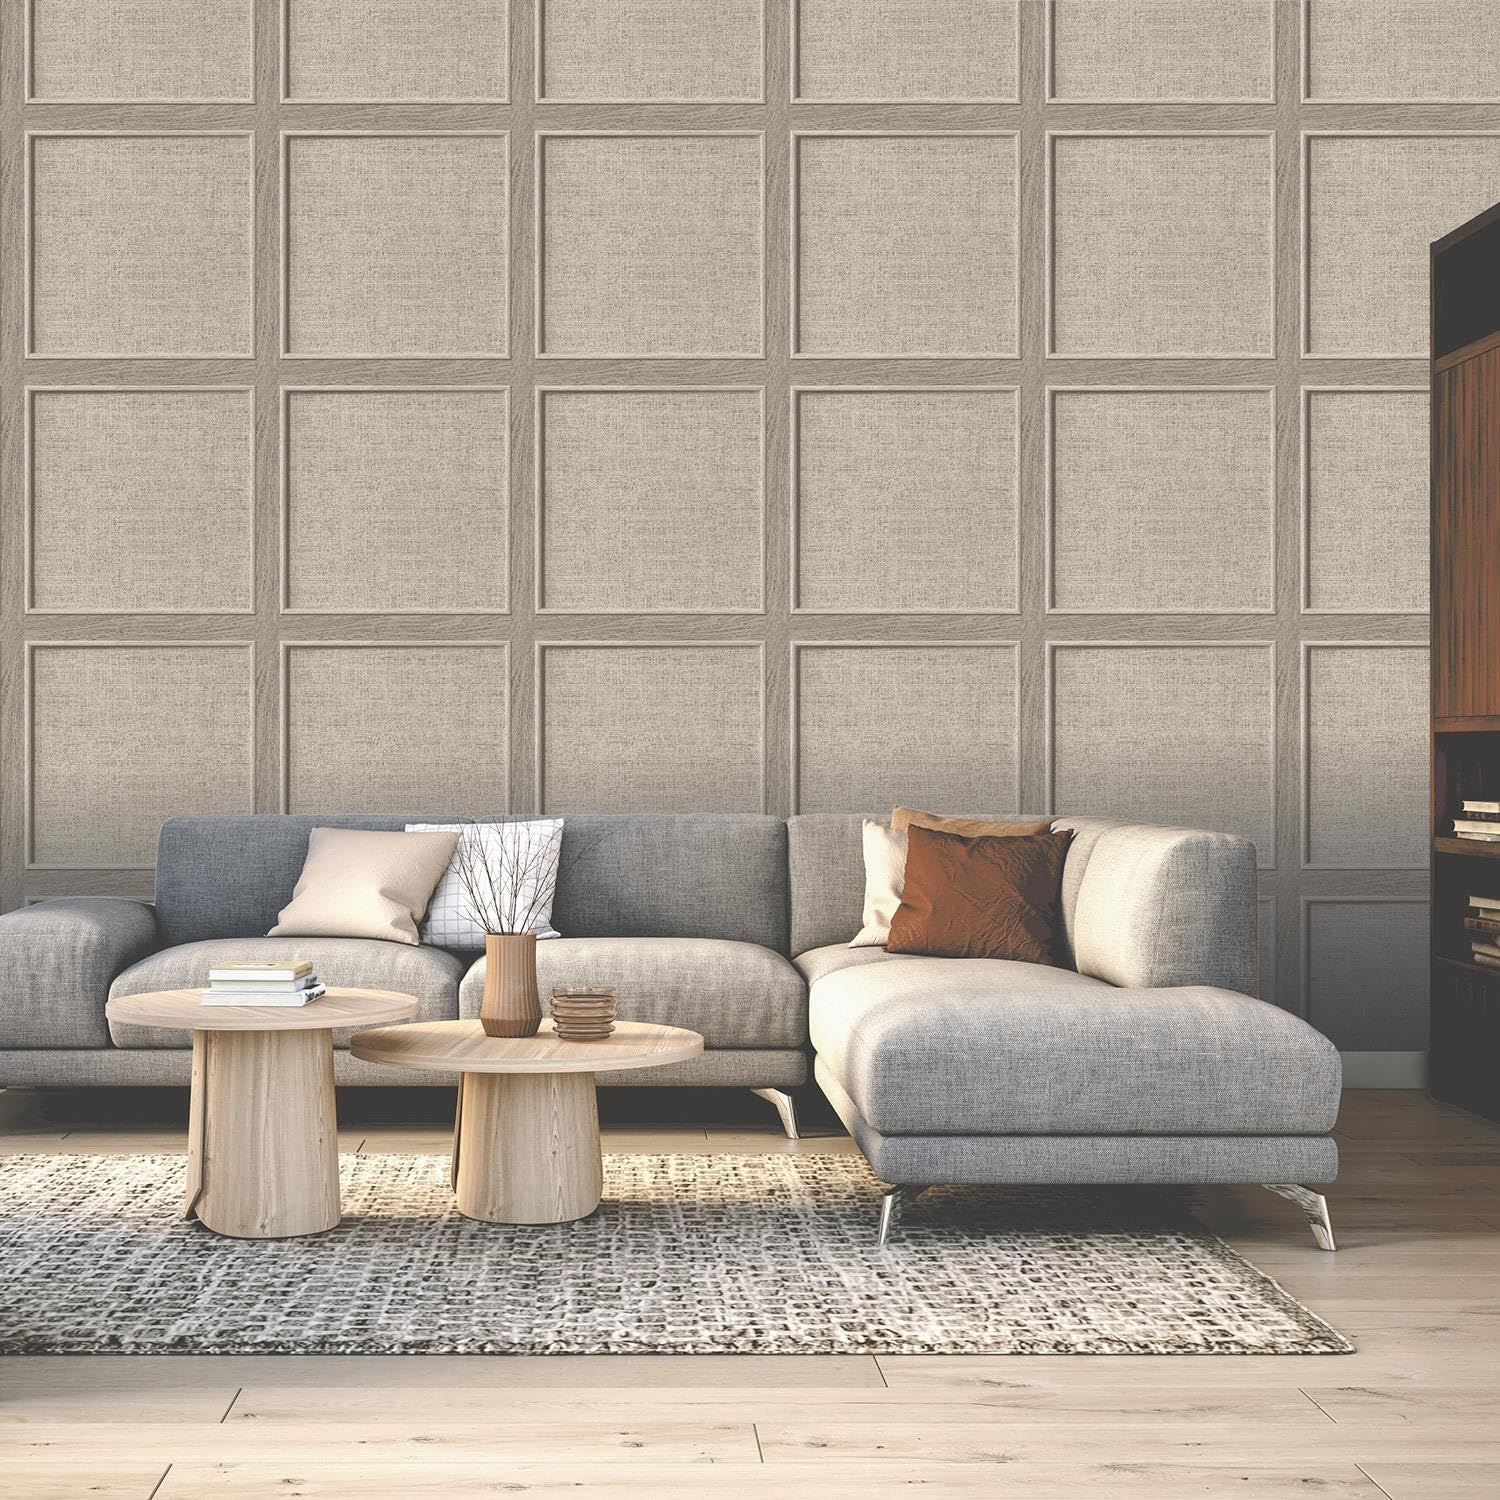 Rasch Bevelled Birch Wood Panelled Weave Grain Wallpaper - Carved Trendy Modern Contemporary Feature Wall